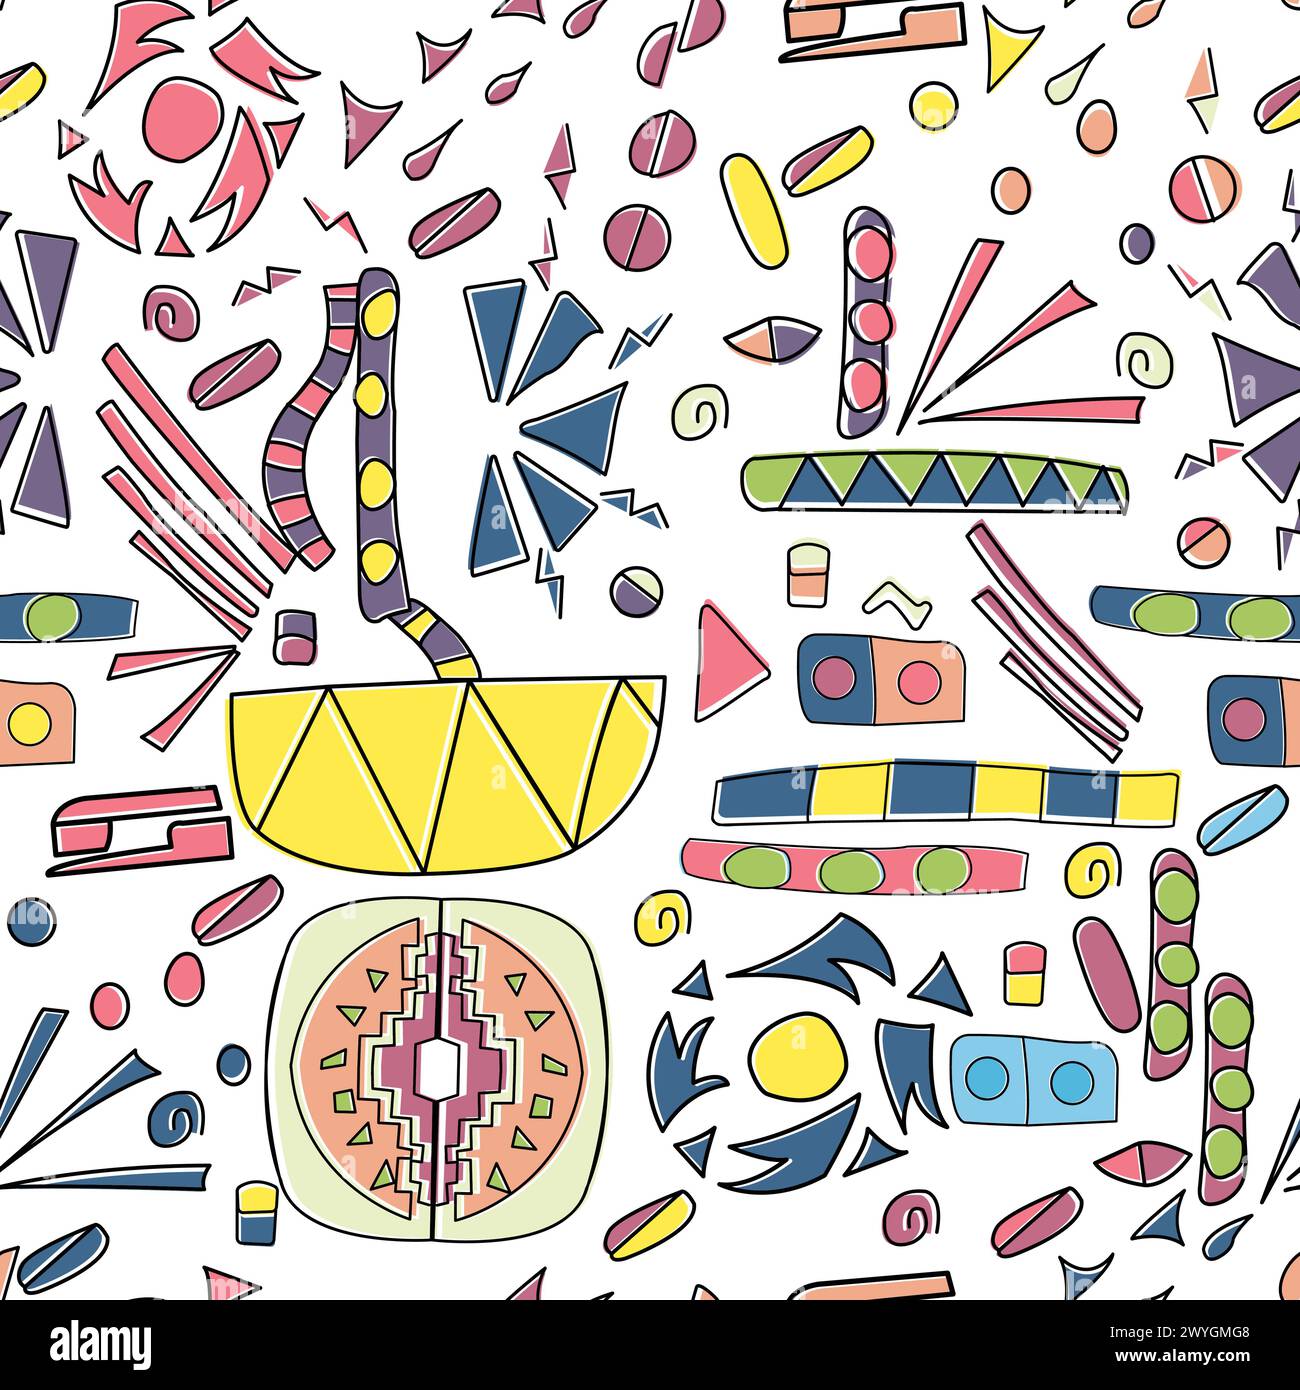 Doodle geometric colorful shapes seamless Stock Vector